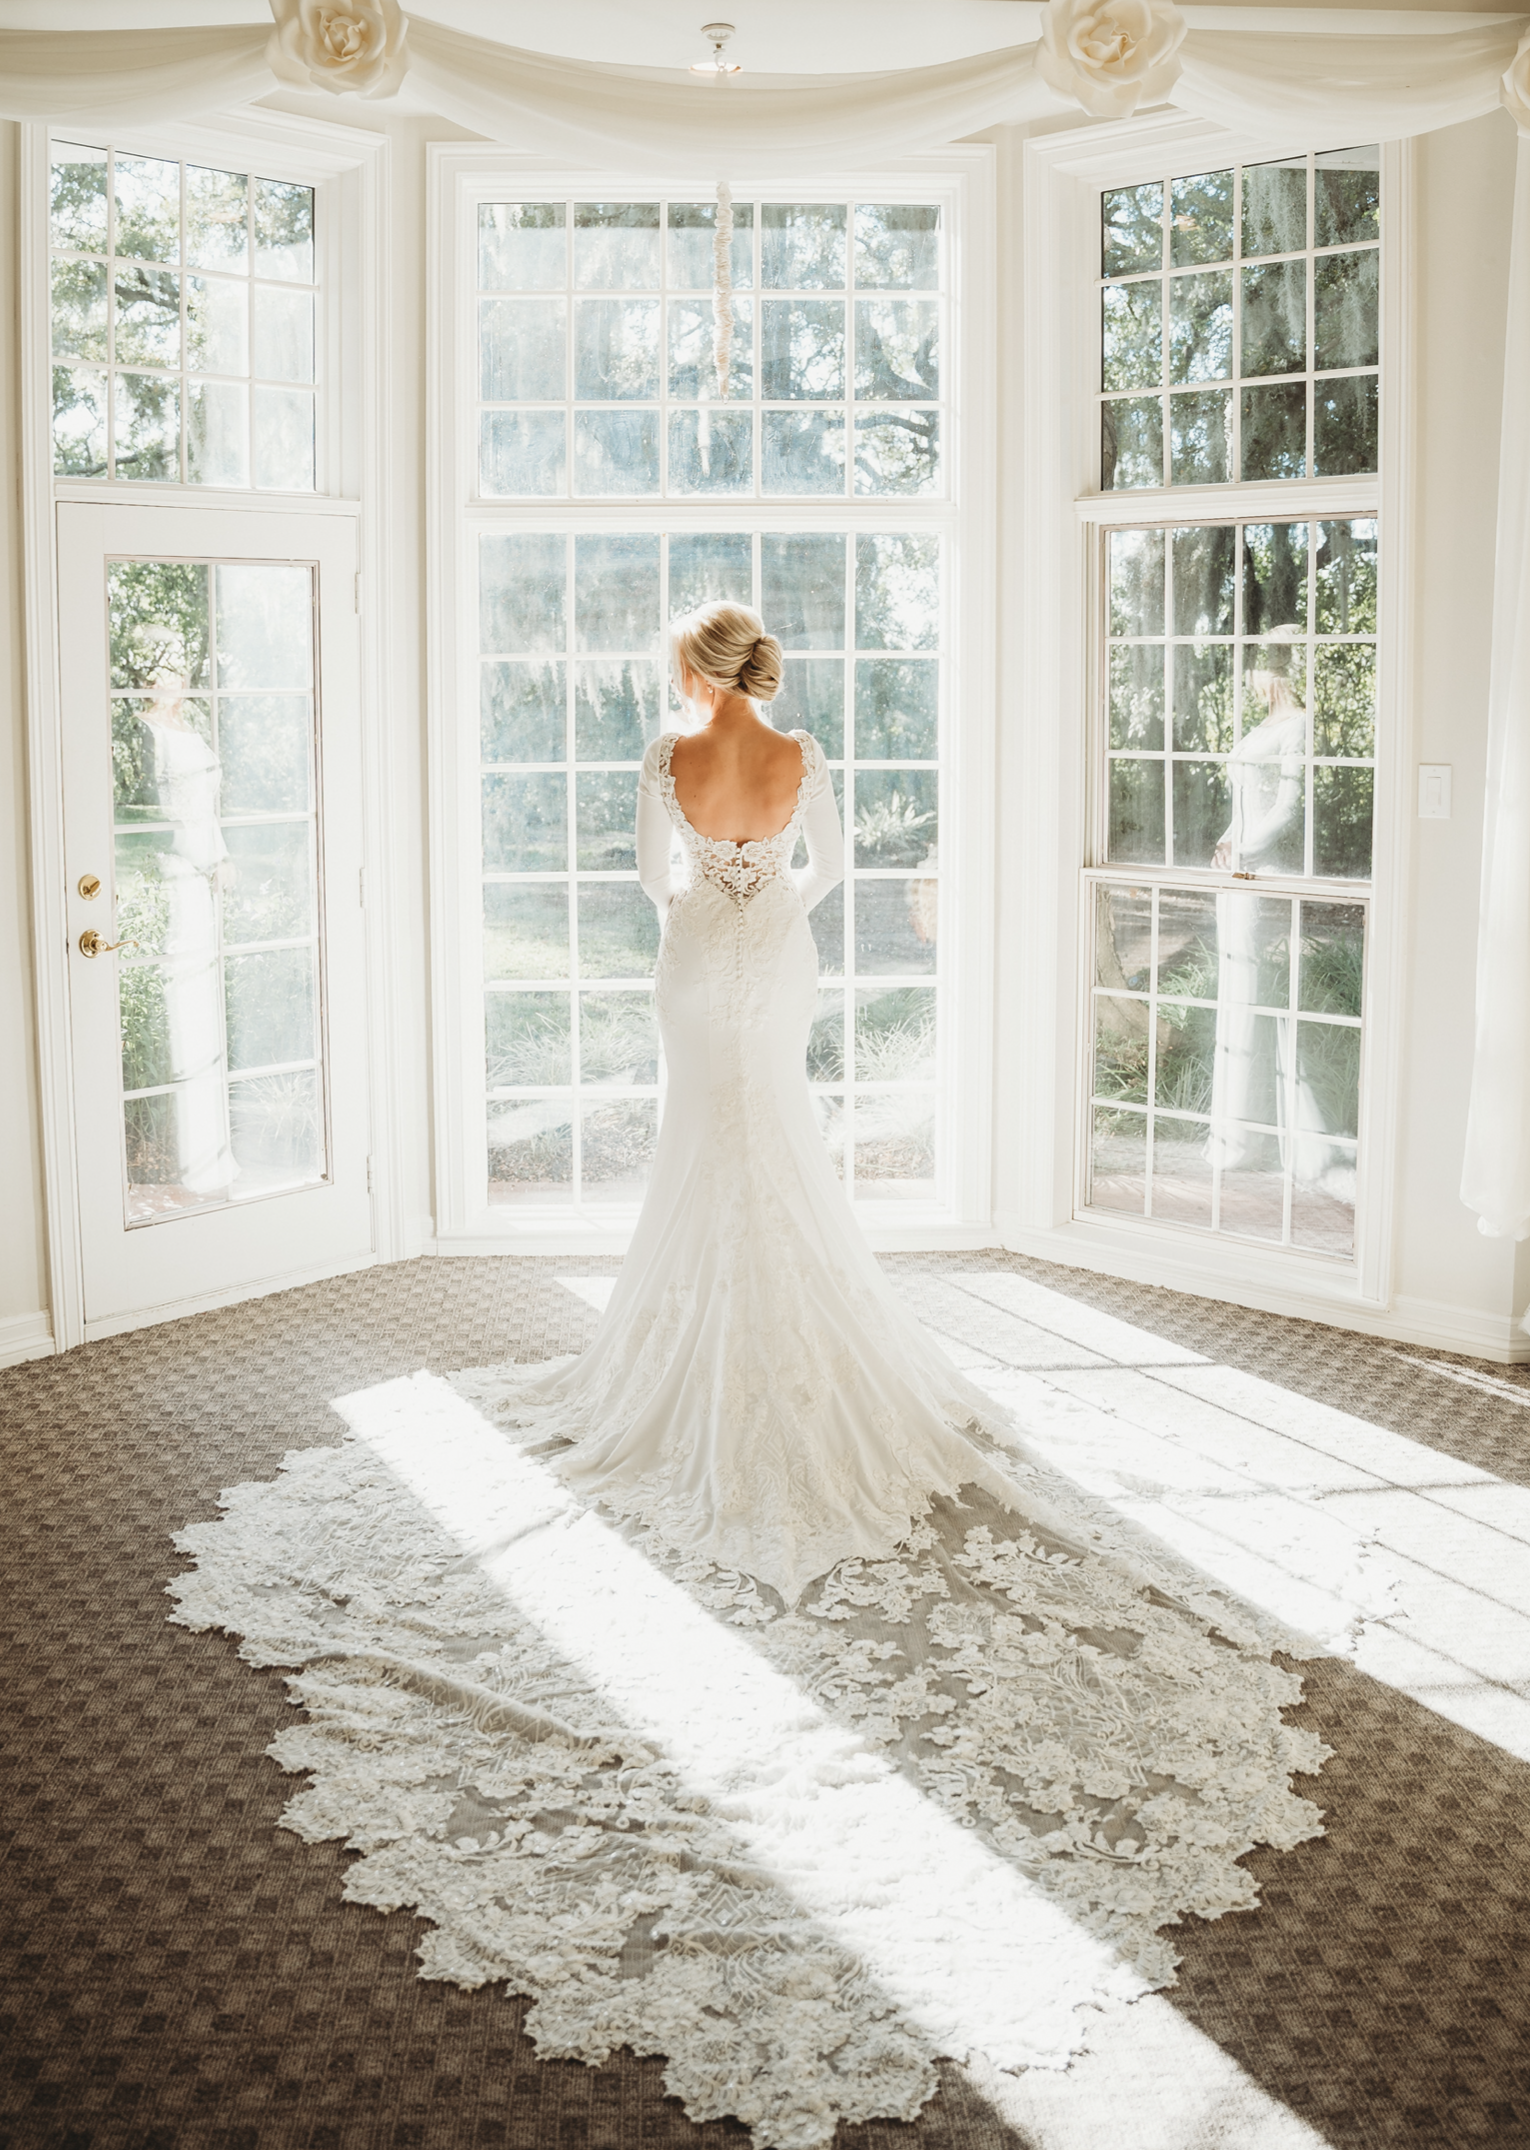 The bride stands by the window why sunlight hits her wedding gown.